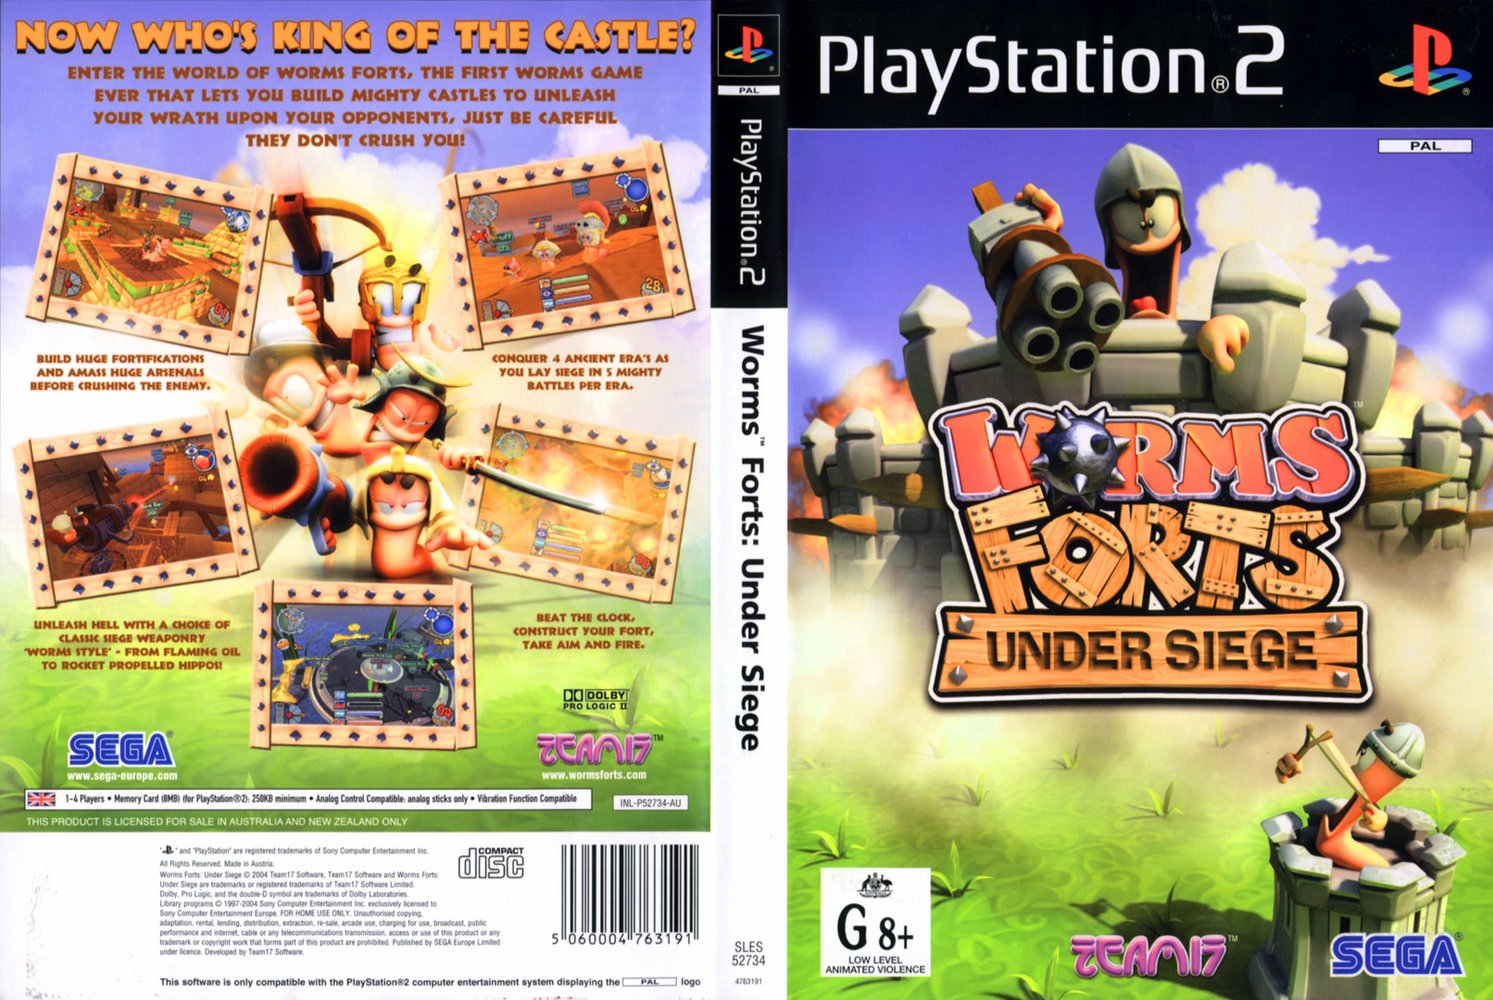 GRY PS2 - Worms_Forts_Under_Siege_Dvd_pal.jpg